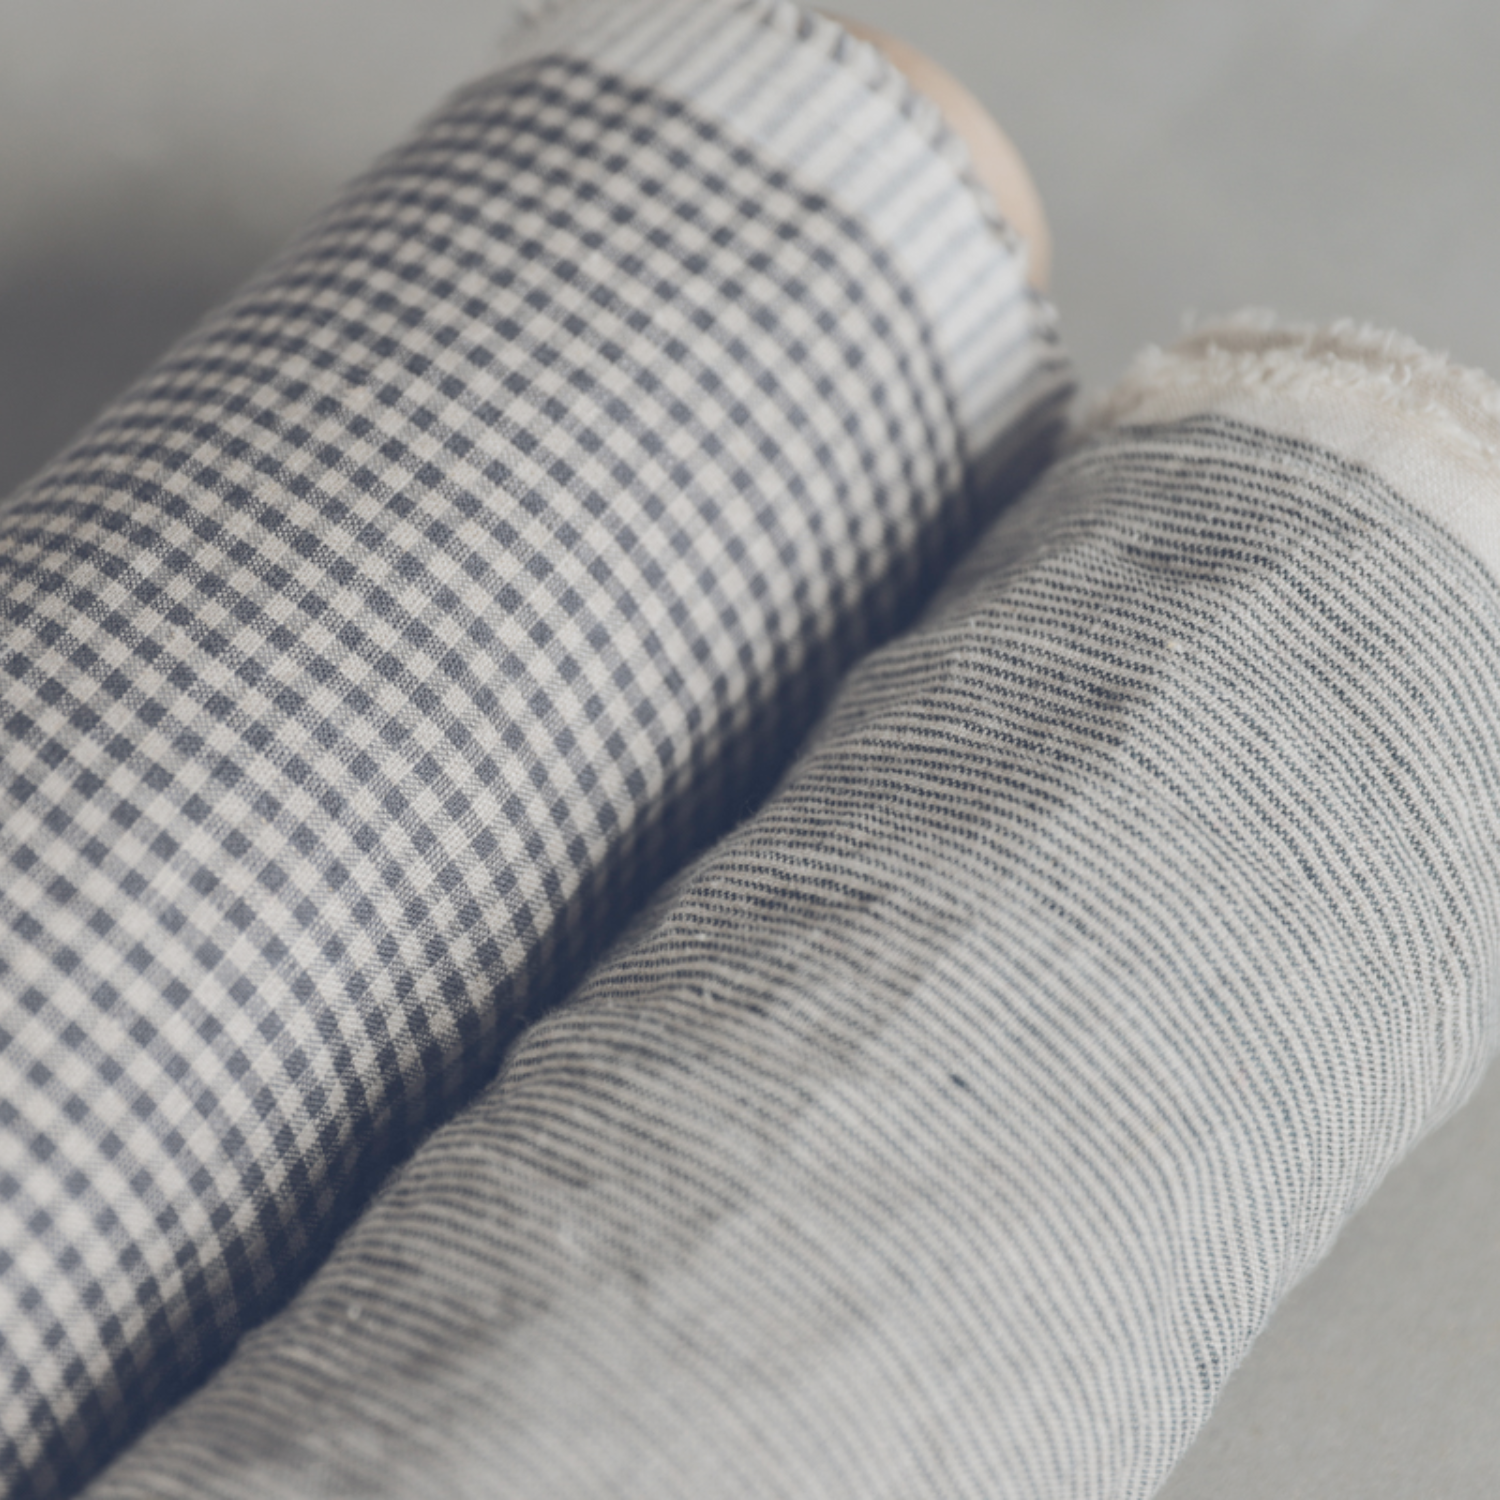 Two rolls of patterned linen fabric.